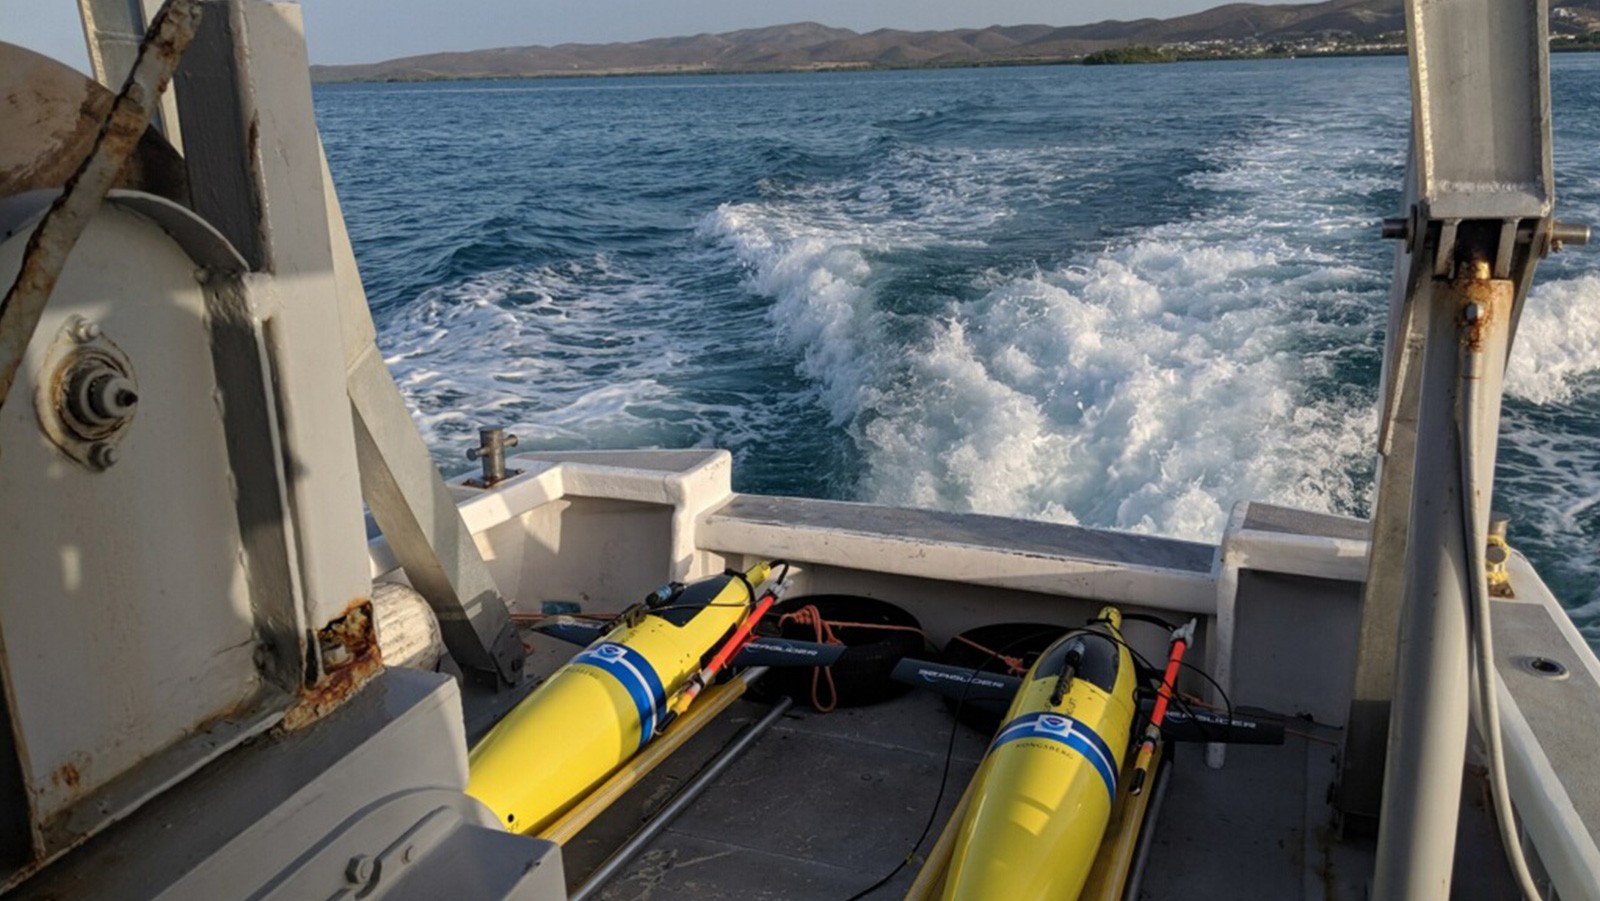 The refurbished gliders are loaded and ready to go. Image credit: NOAA